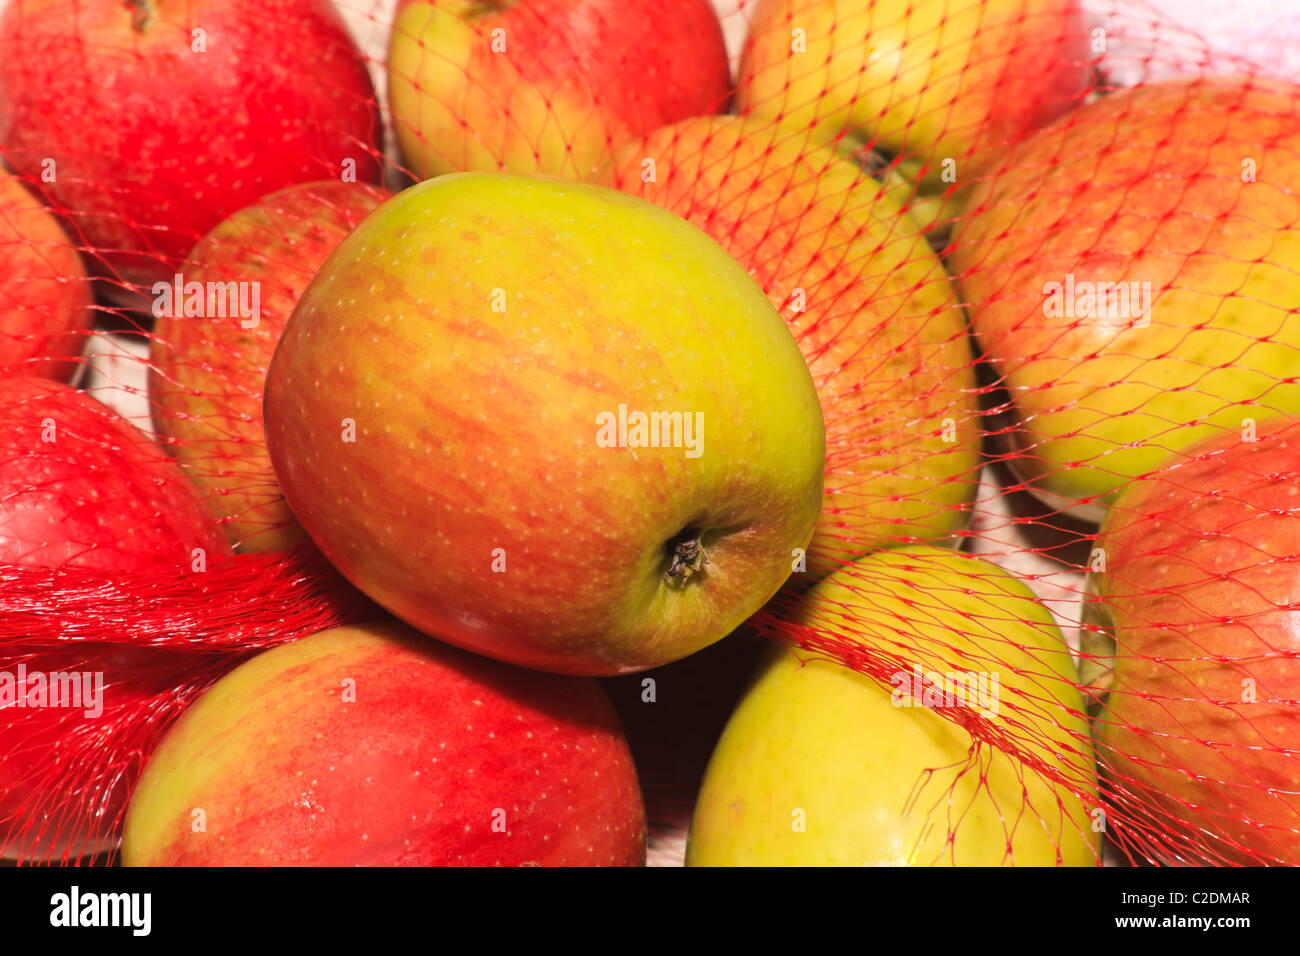 Red and yellow ripe apples in net Stock Photo